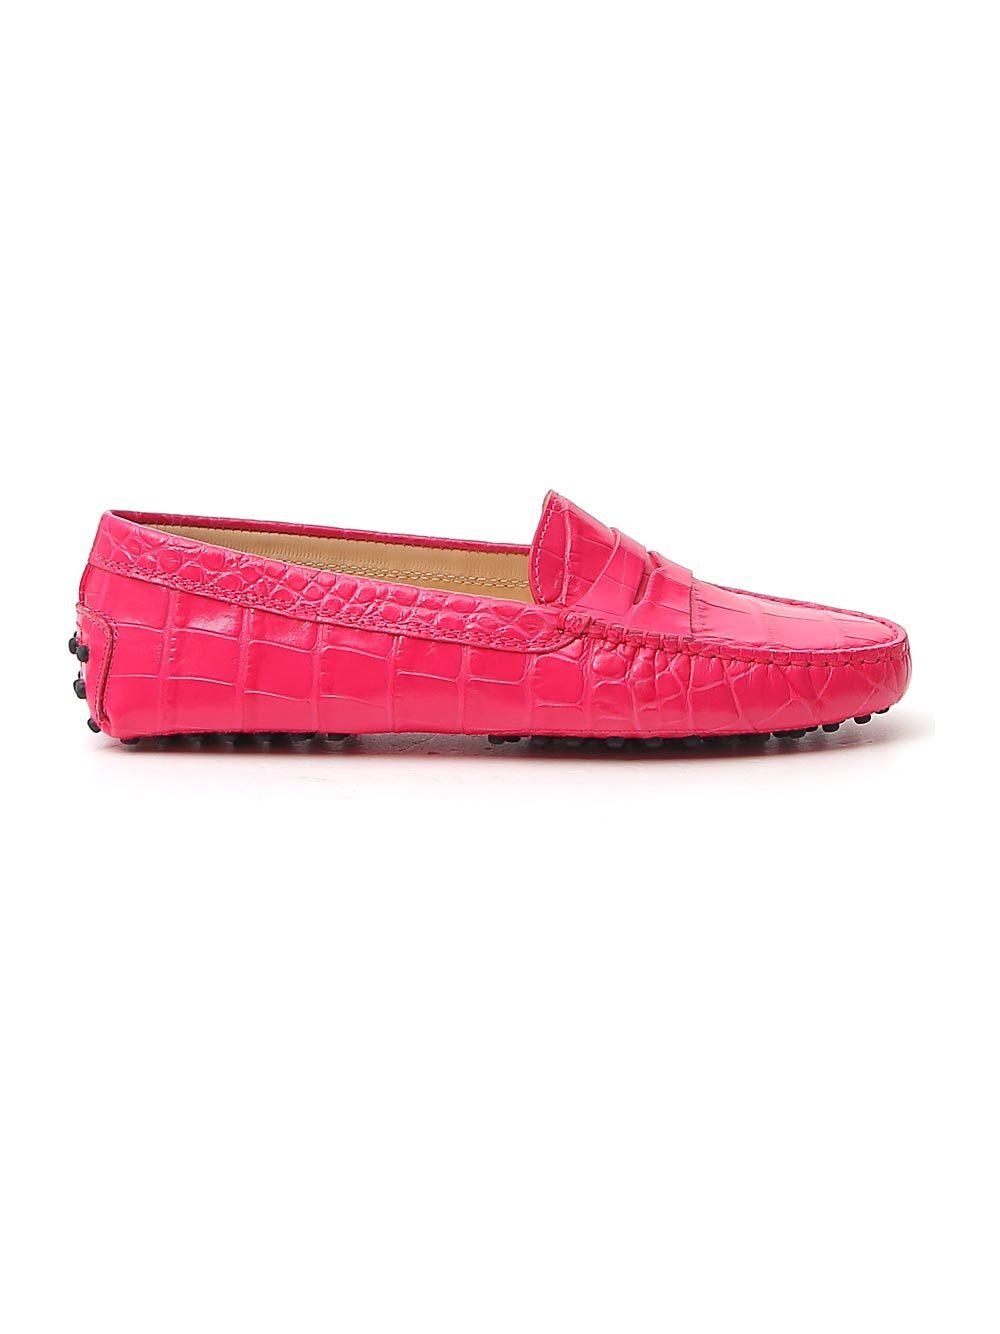 Tod's Leather Gommino Driving Loafers in Pink - Lyst